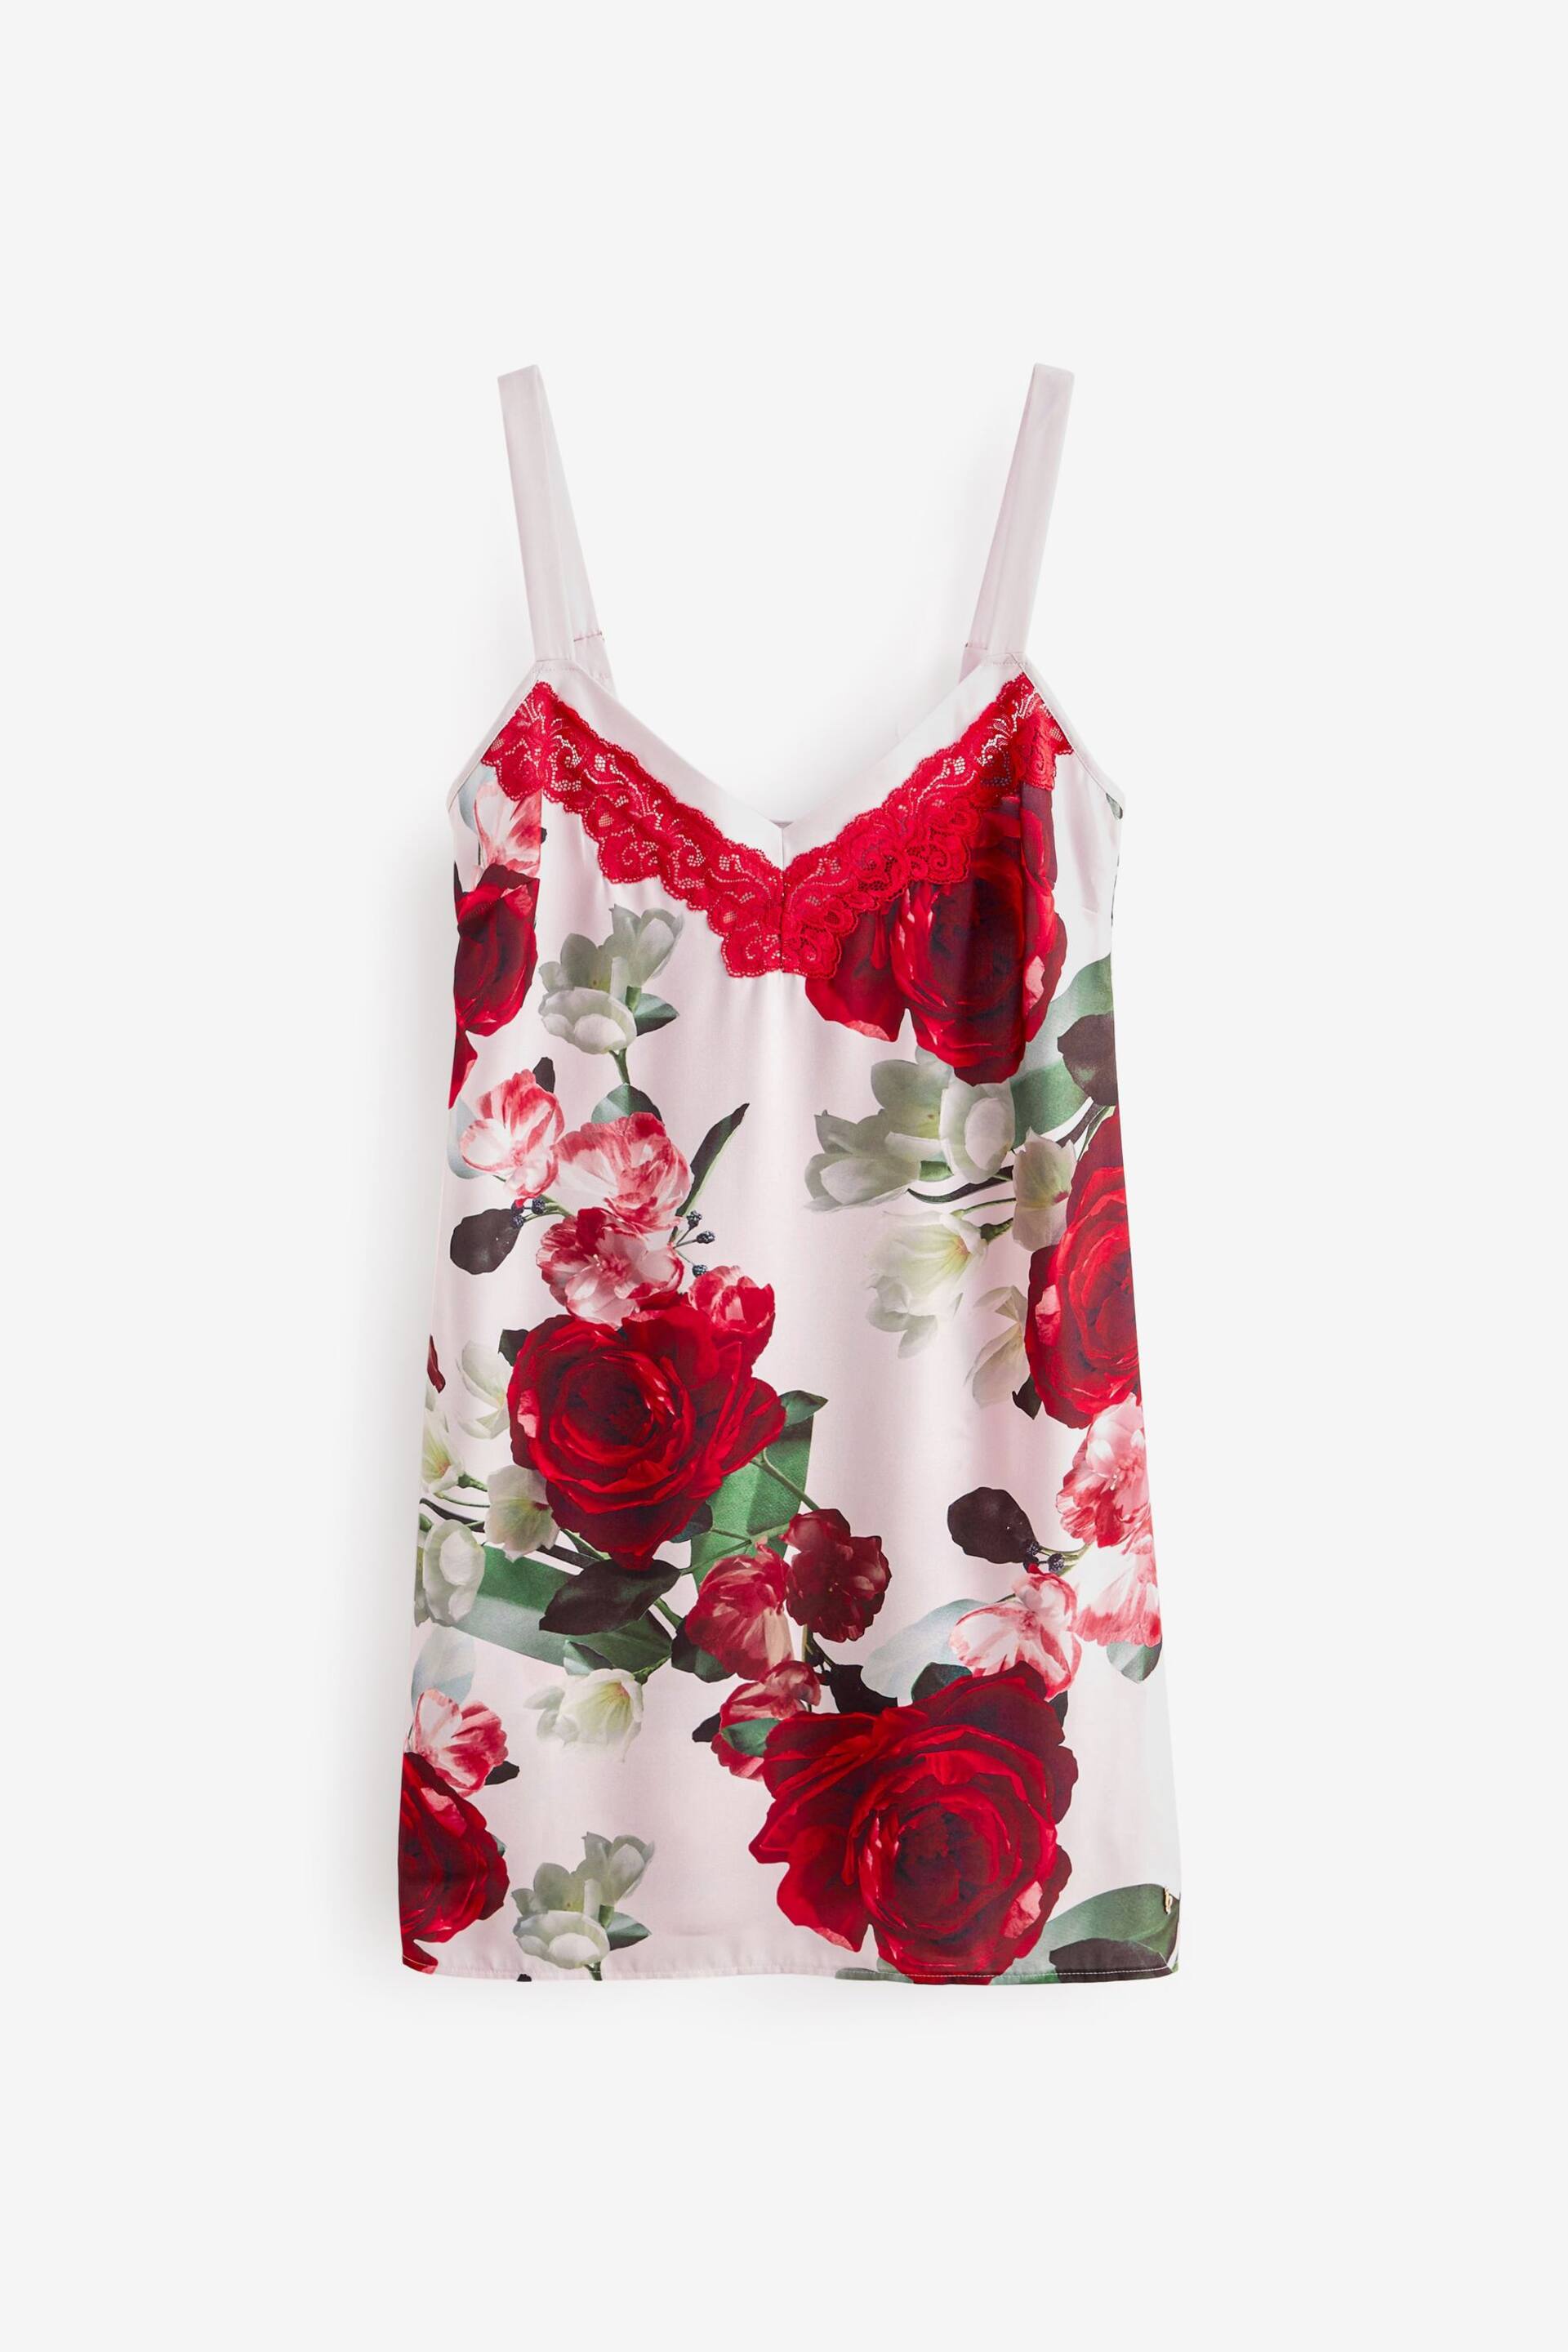 B by Ted Baker Floral Satin Lace Slip Night Dress - Image 7 of 8